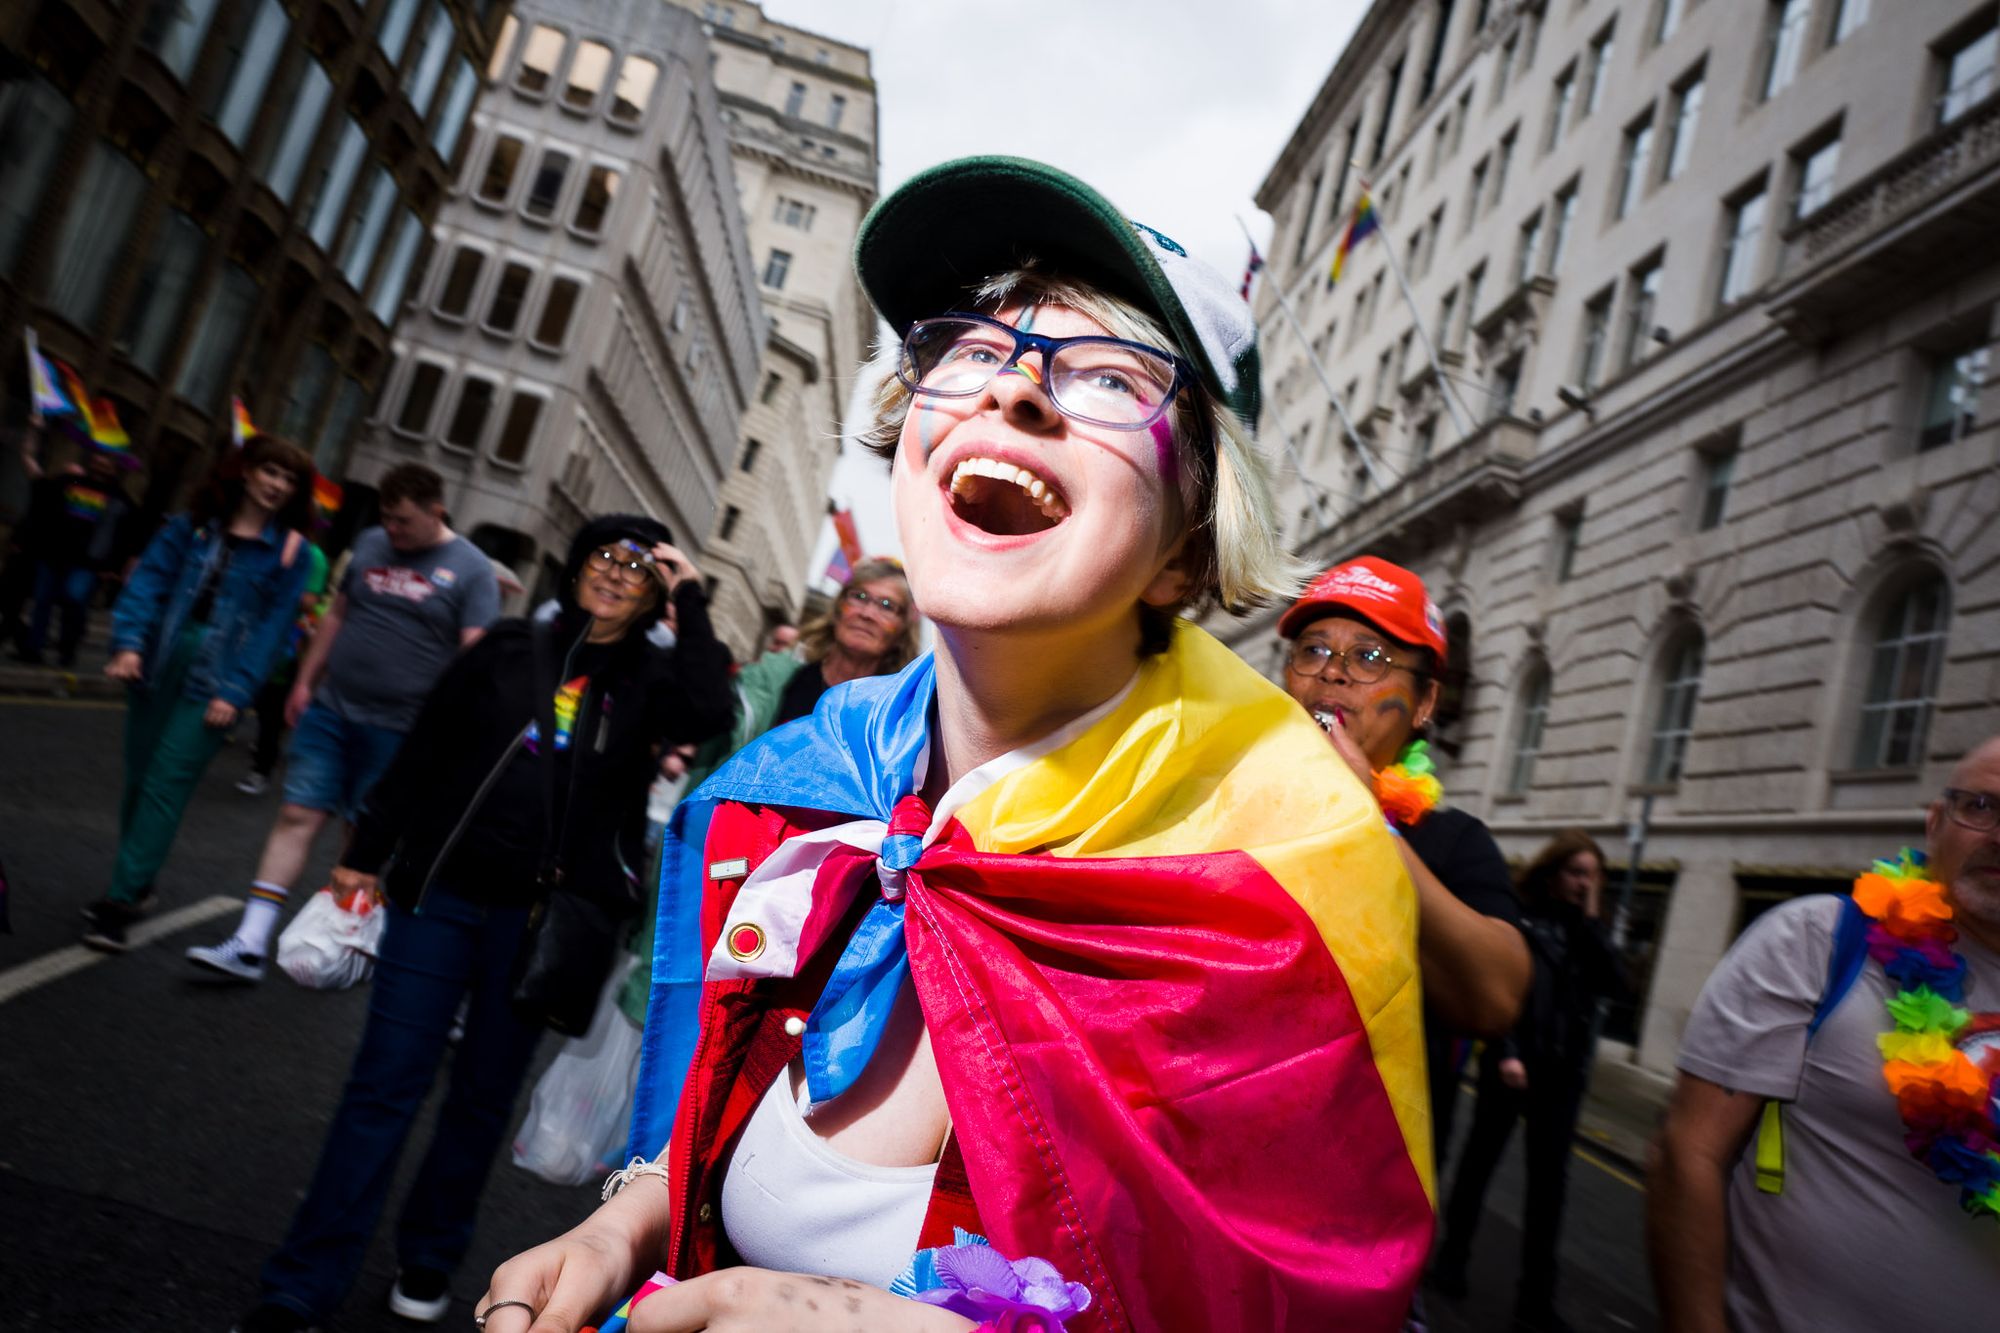 A happy person at pride wearing a pansexual flag.